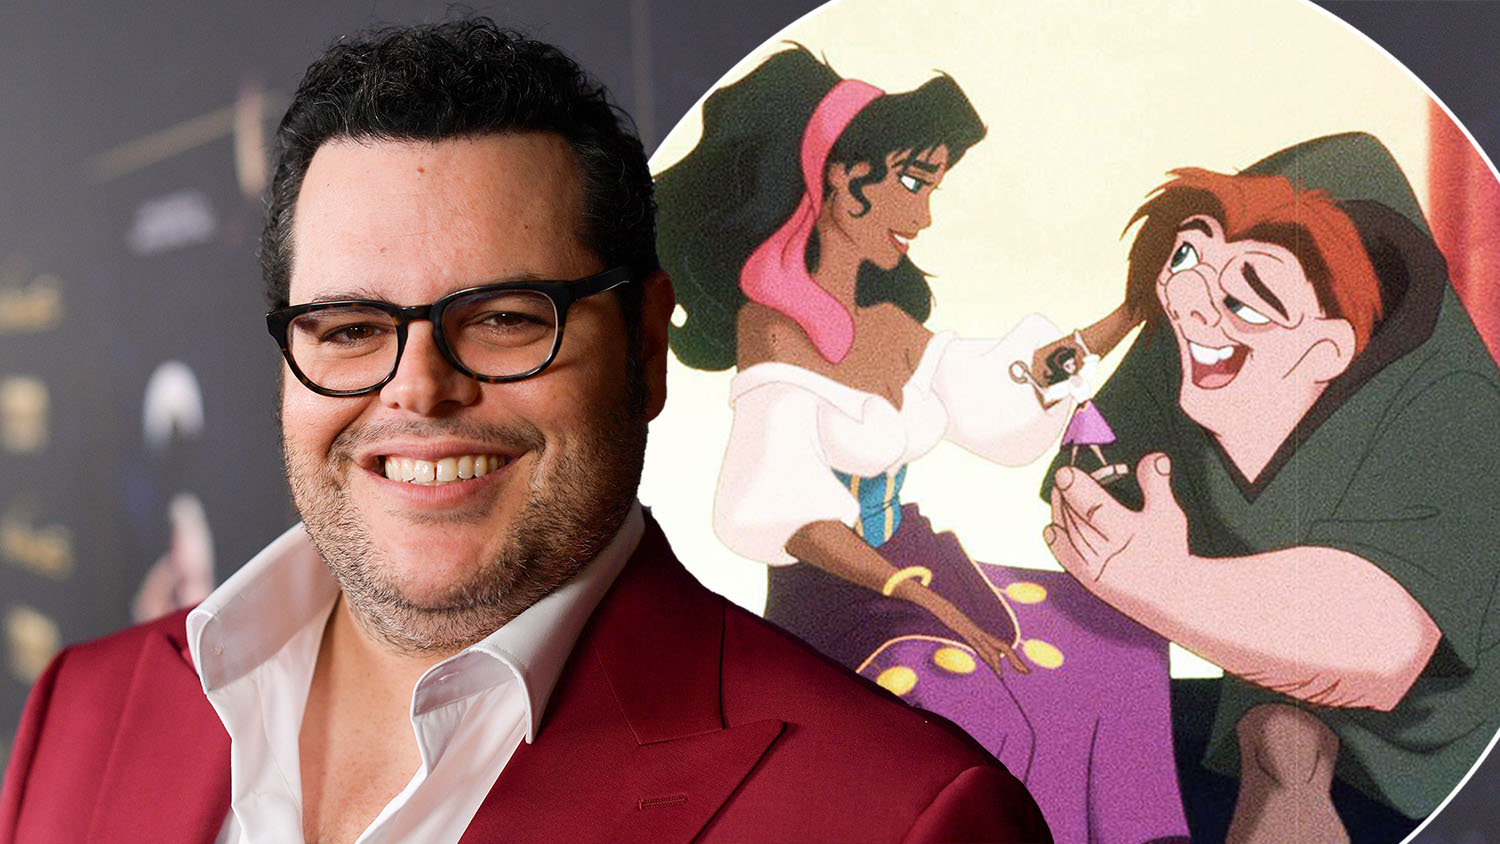 The Hunchback of Notre Dame: Josh Gad is still working on live-action remake